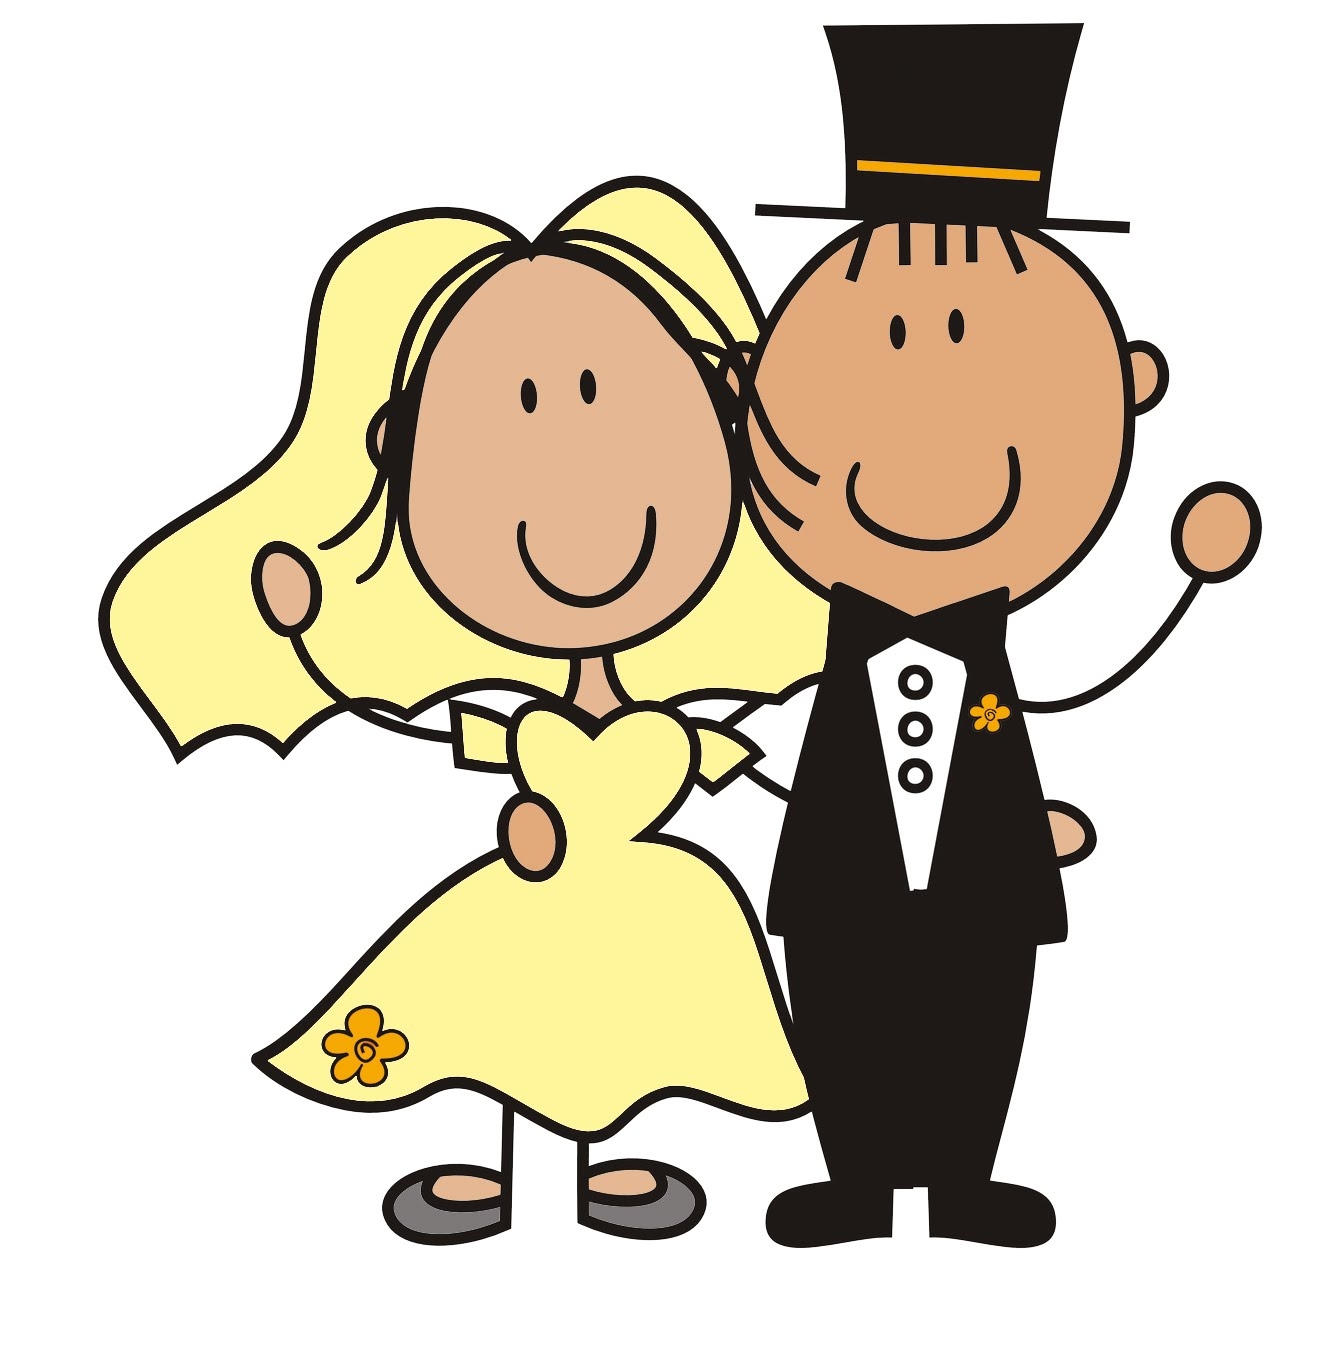 Free wedding clipart Beautiful Clip art images for wedding.